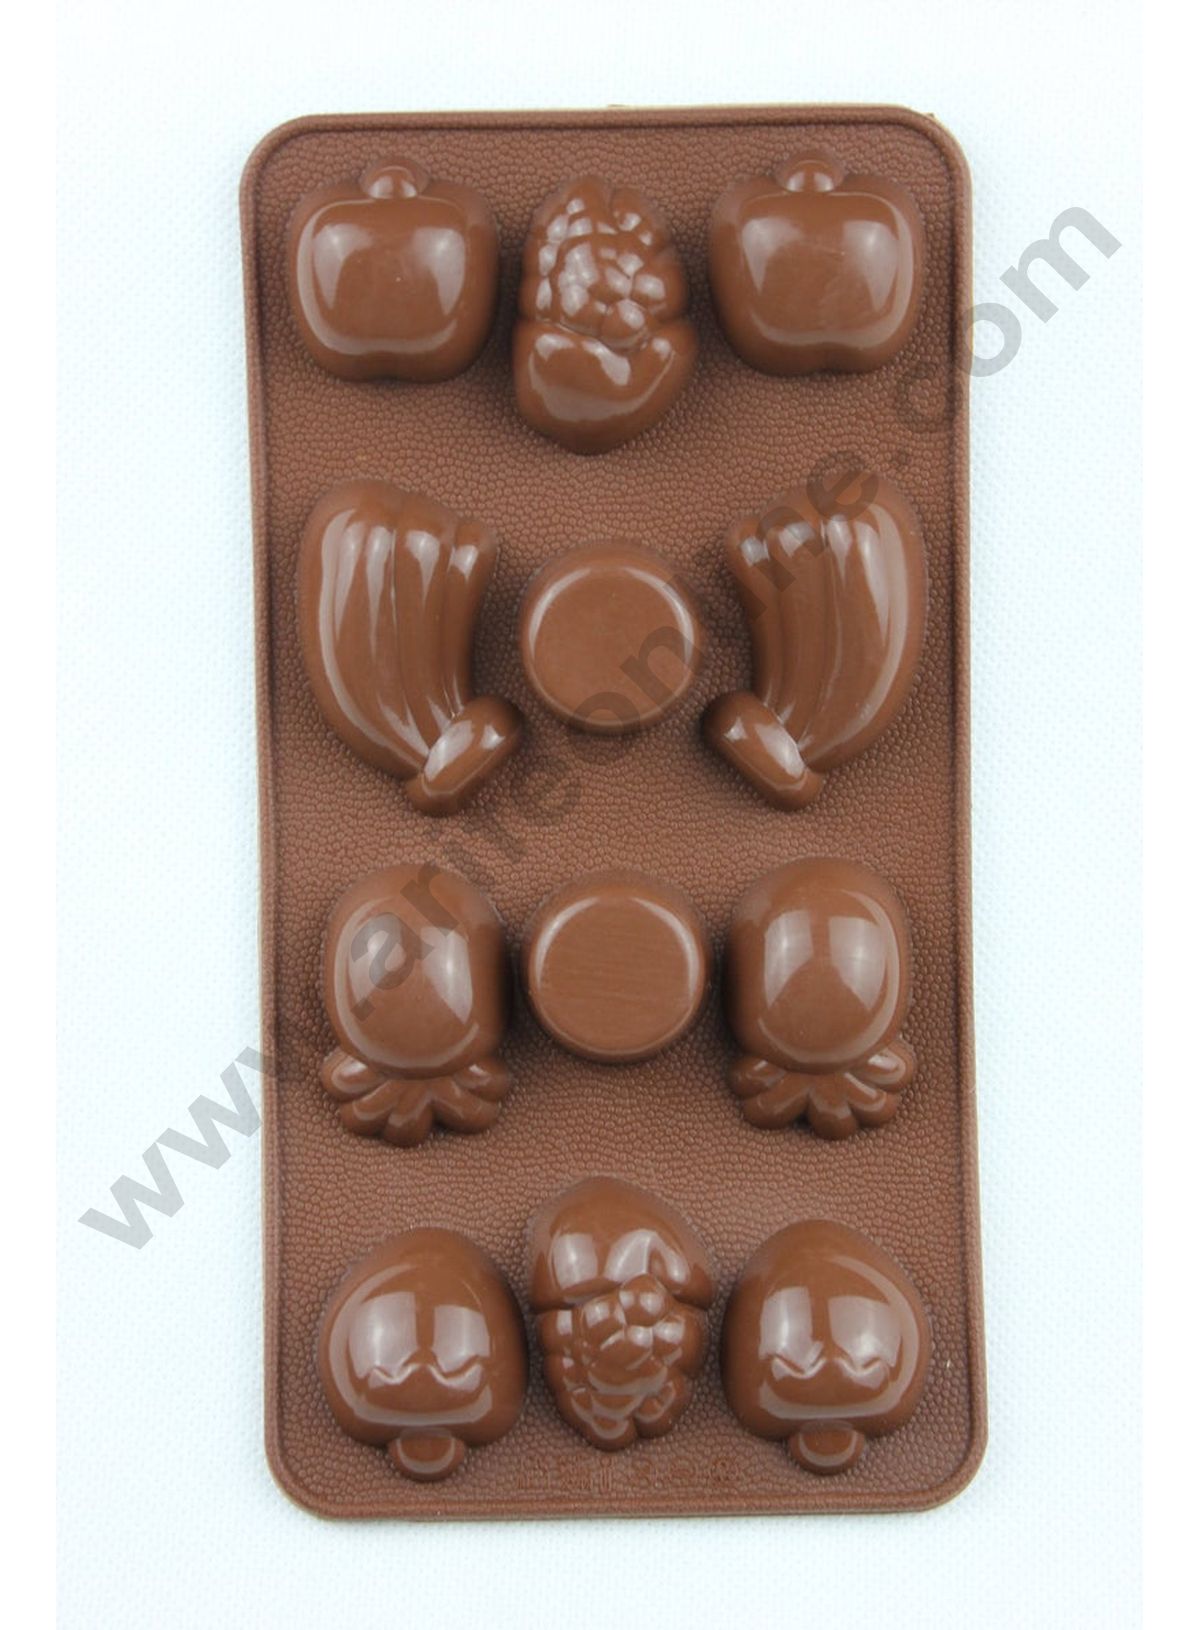 Mixed Shapes Silicone Chocolate Mold